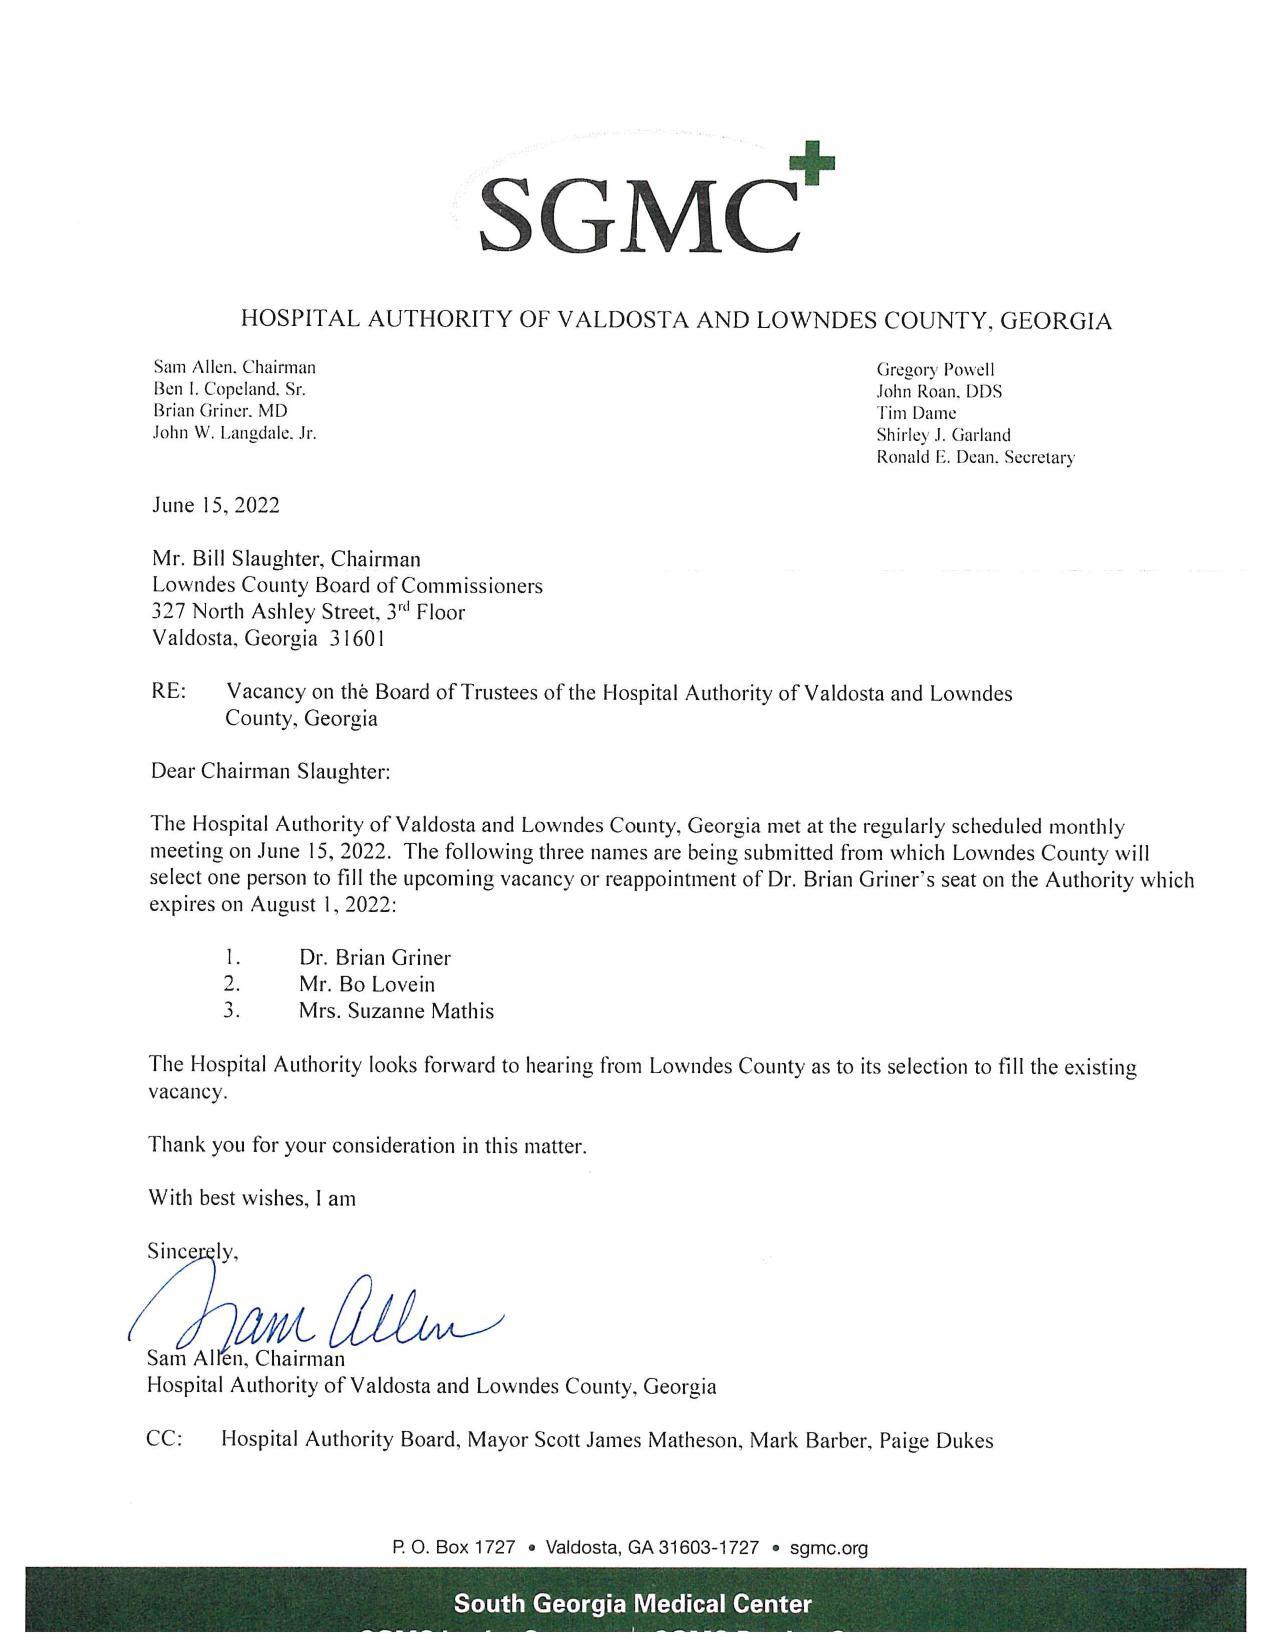 Brian Griner post request letter from Hospital Authority